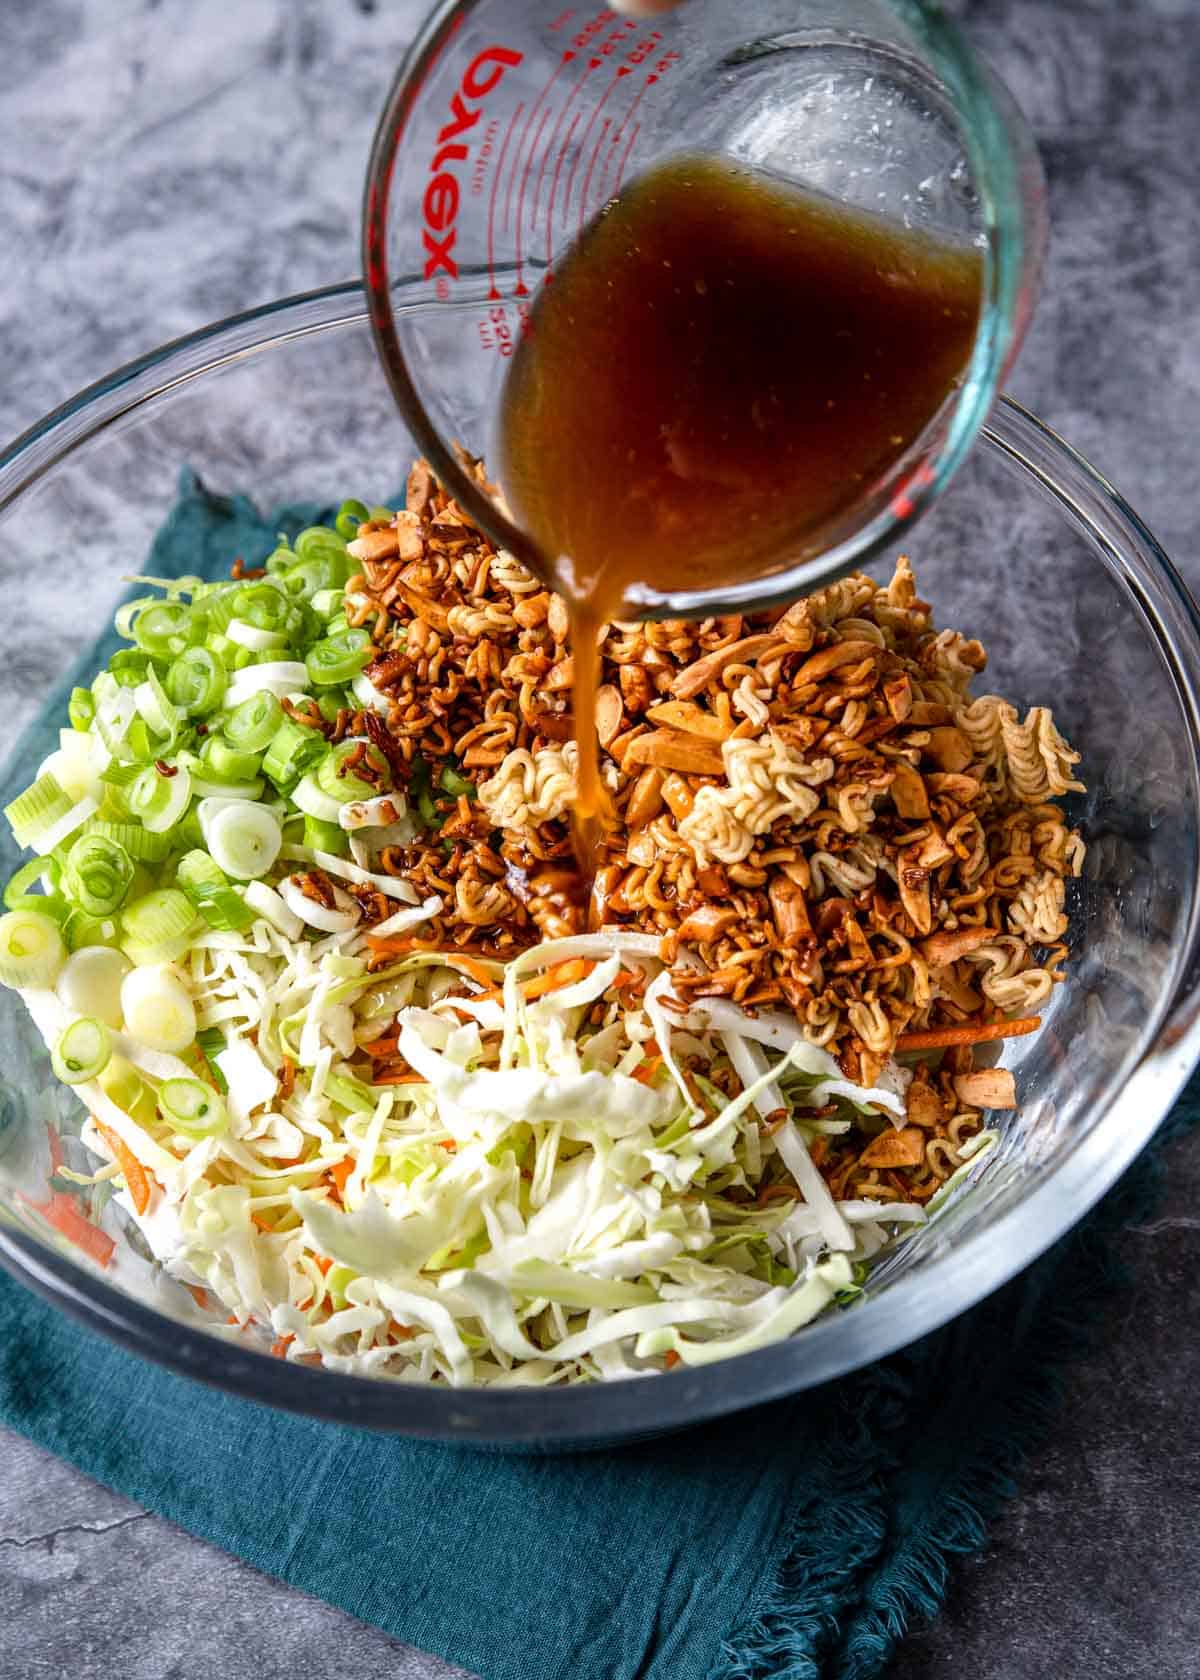 pouring dressing over a slaw mix with ramen noodles and almonds